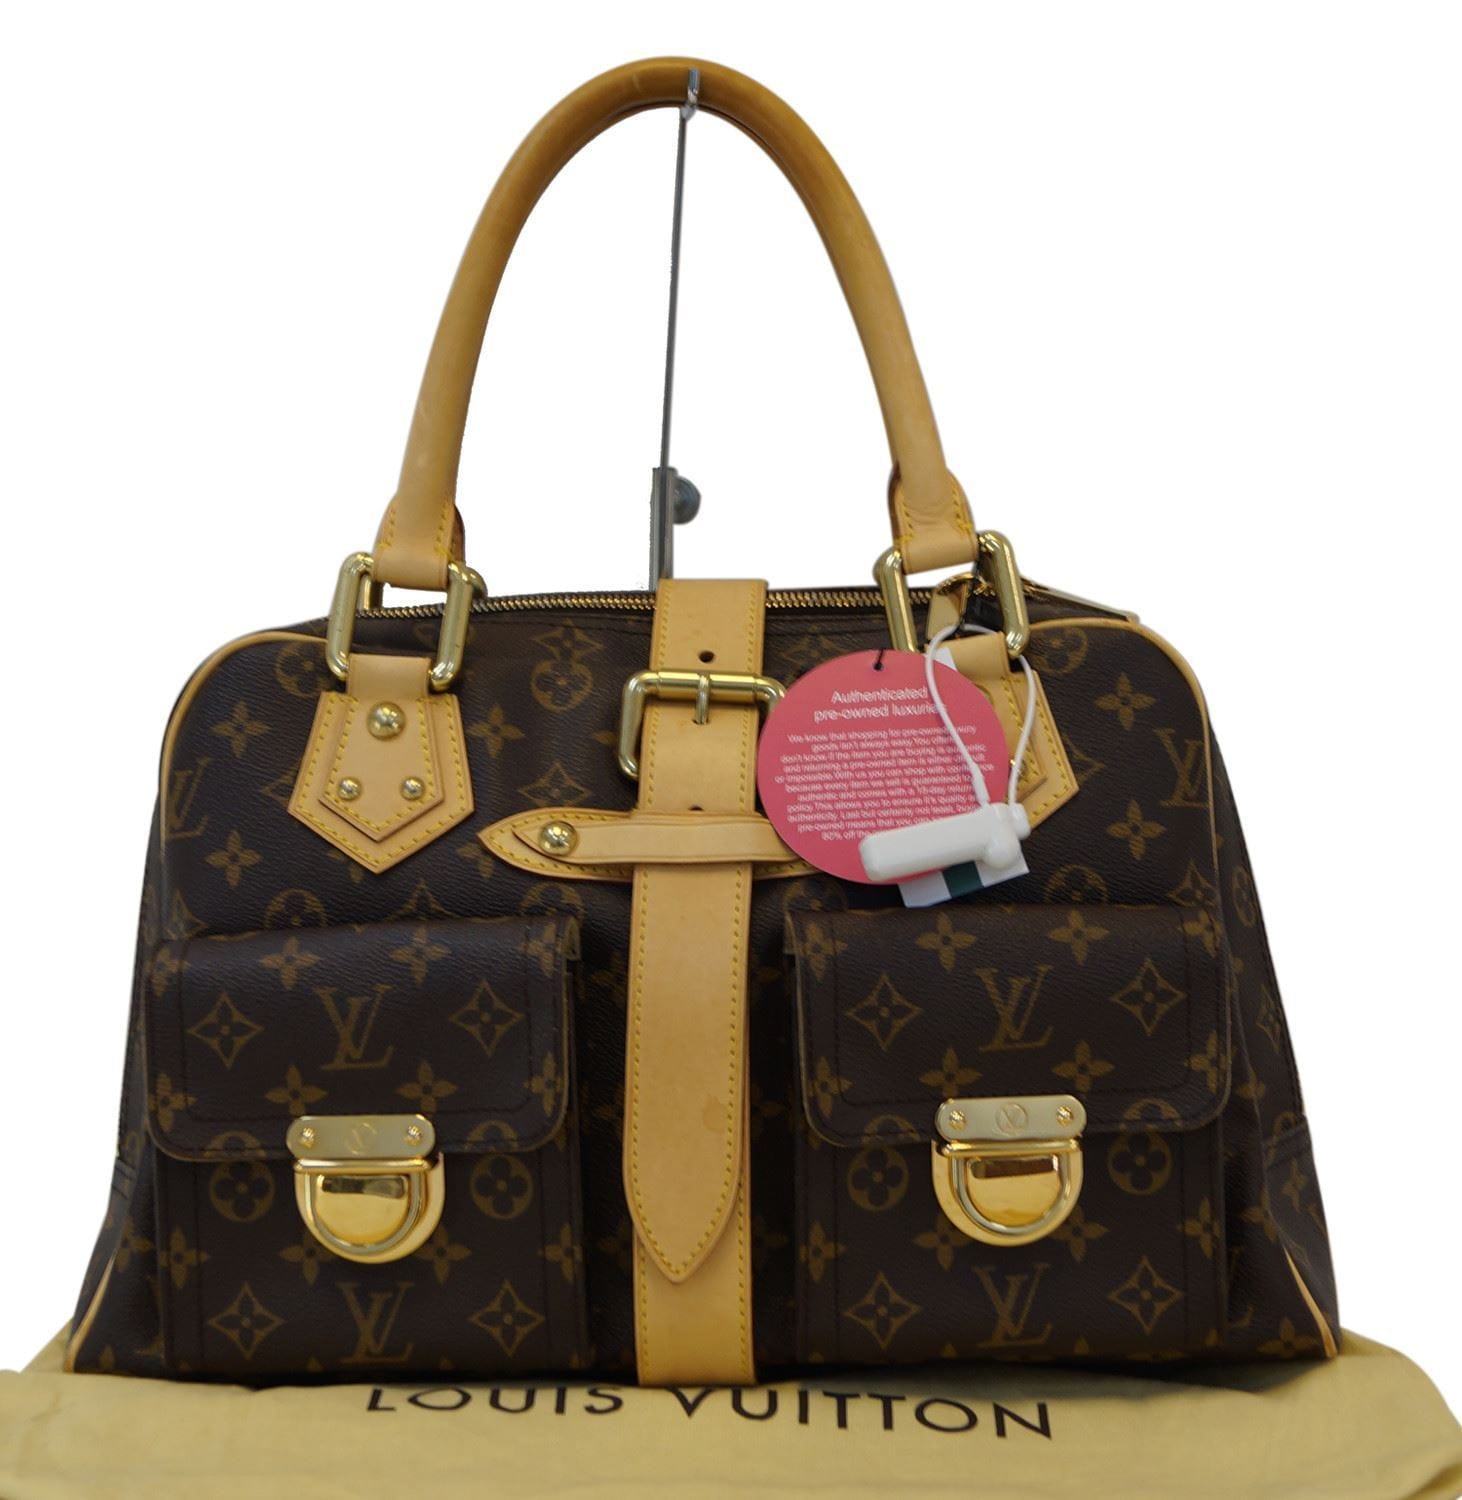 Louis Vuitton - Authenticated  Handbag - Leather Brown For Woman, Very Good condition